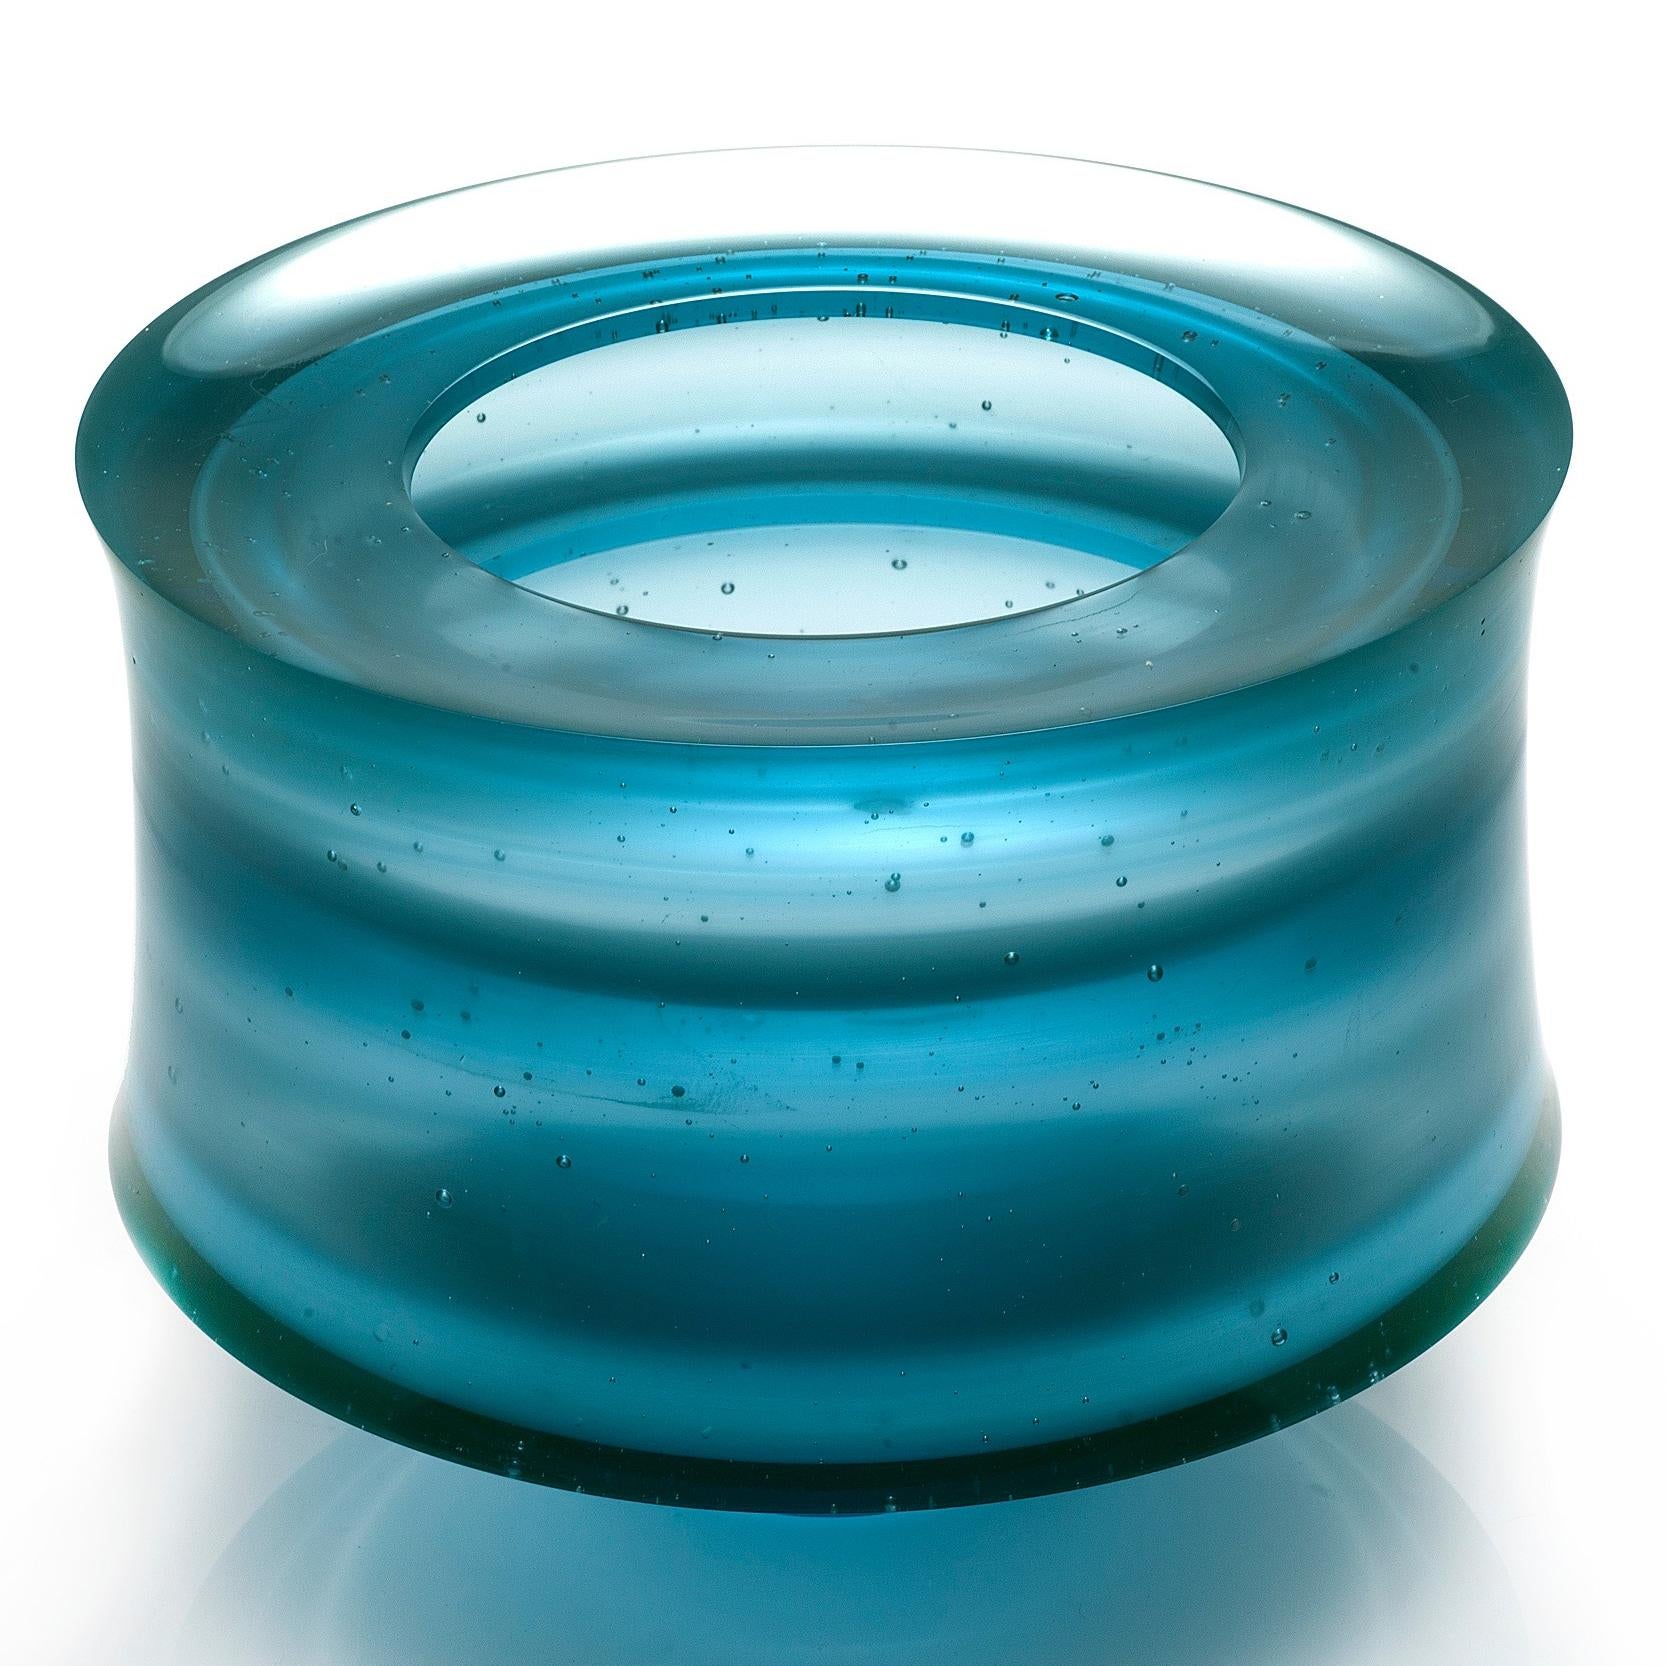 Cast Corymb, a Unique Aqua/Turquoise Glass Art Work and Centrepiece by Paul Stopler